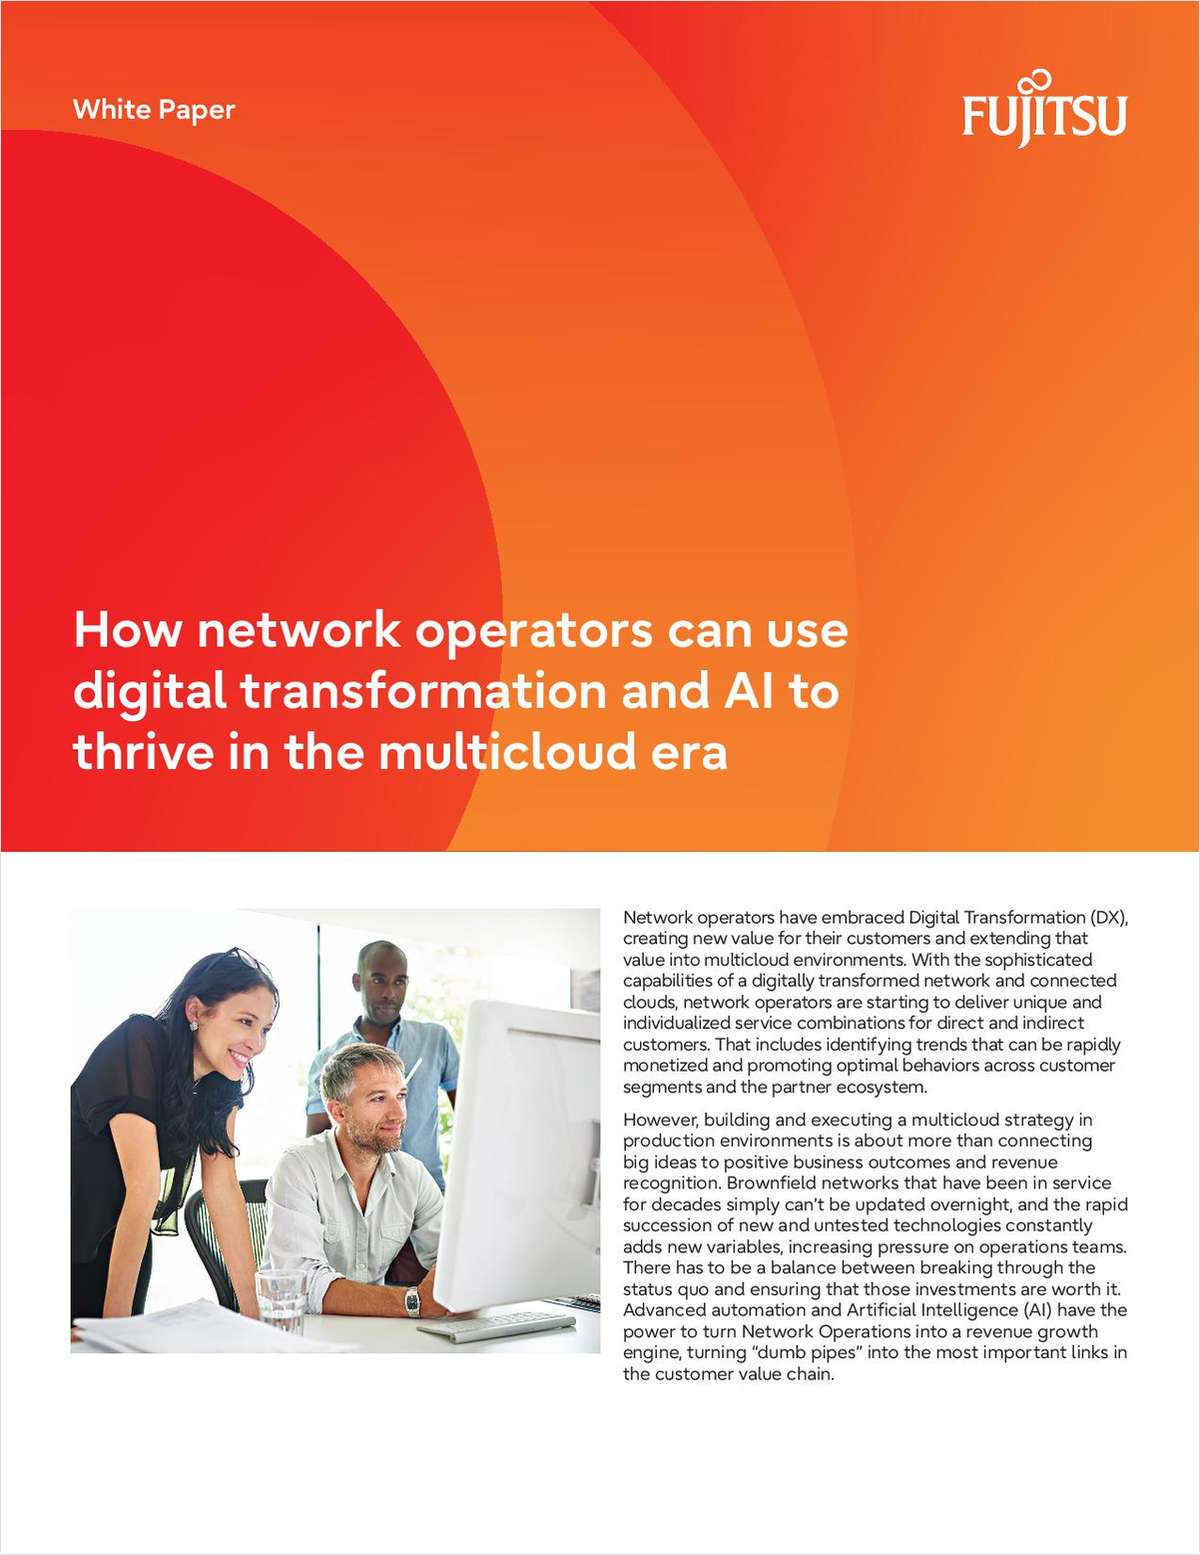 How will operators thrive in the multicloud era?